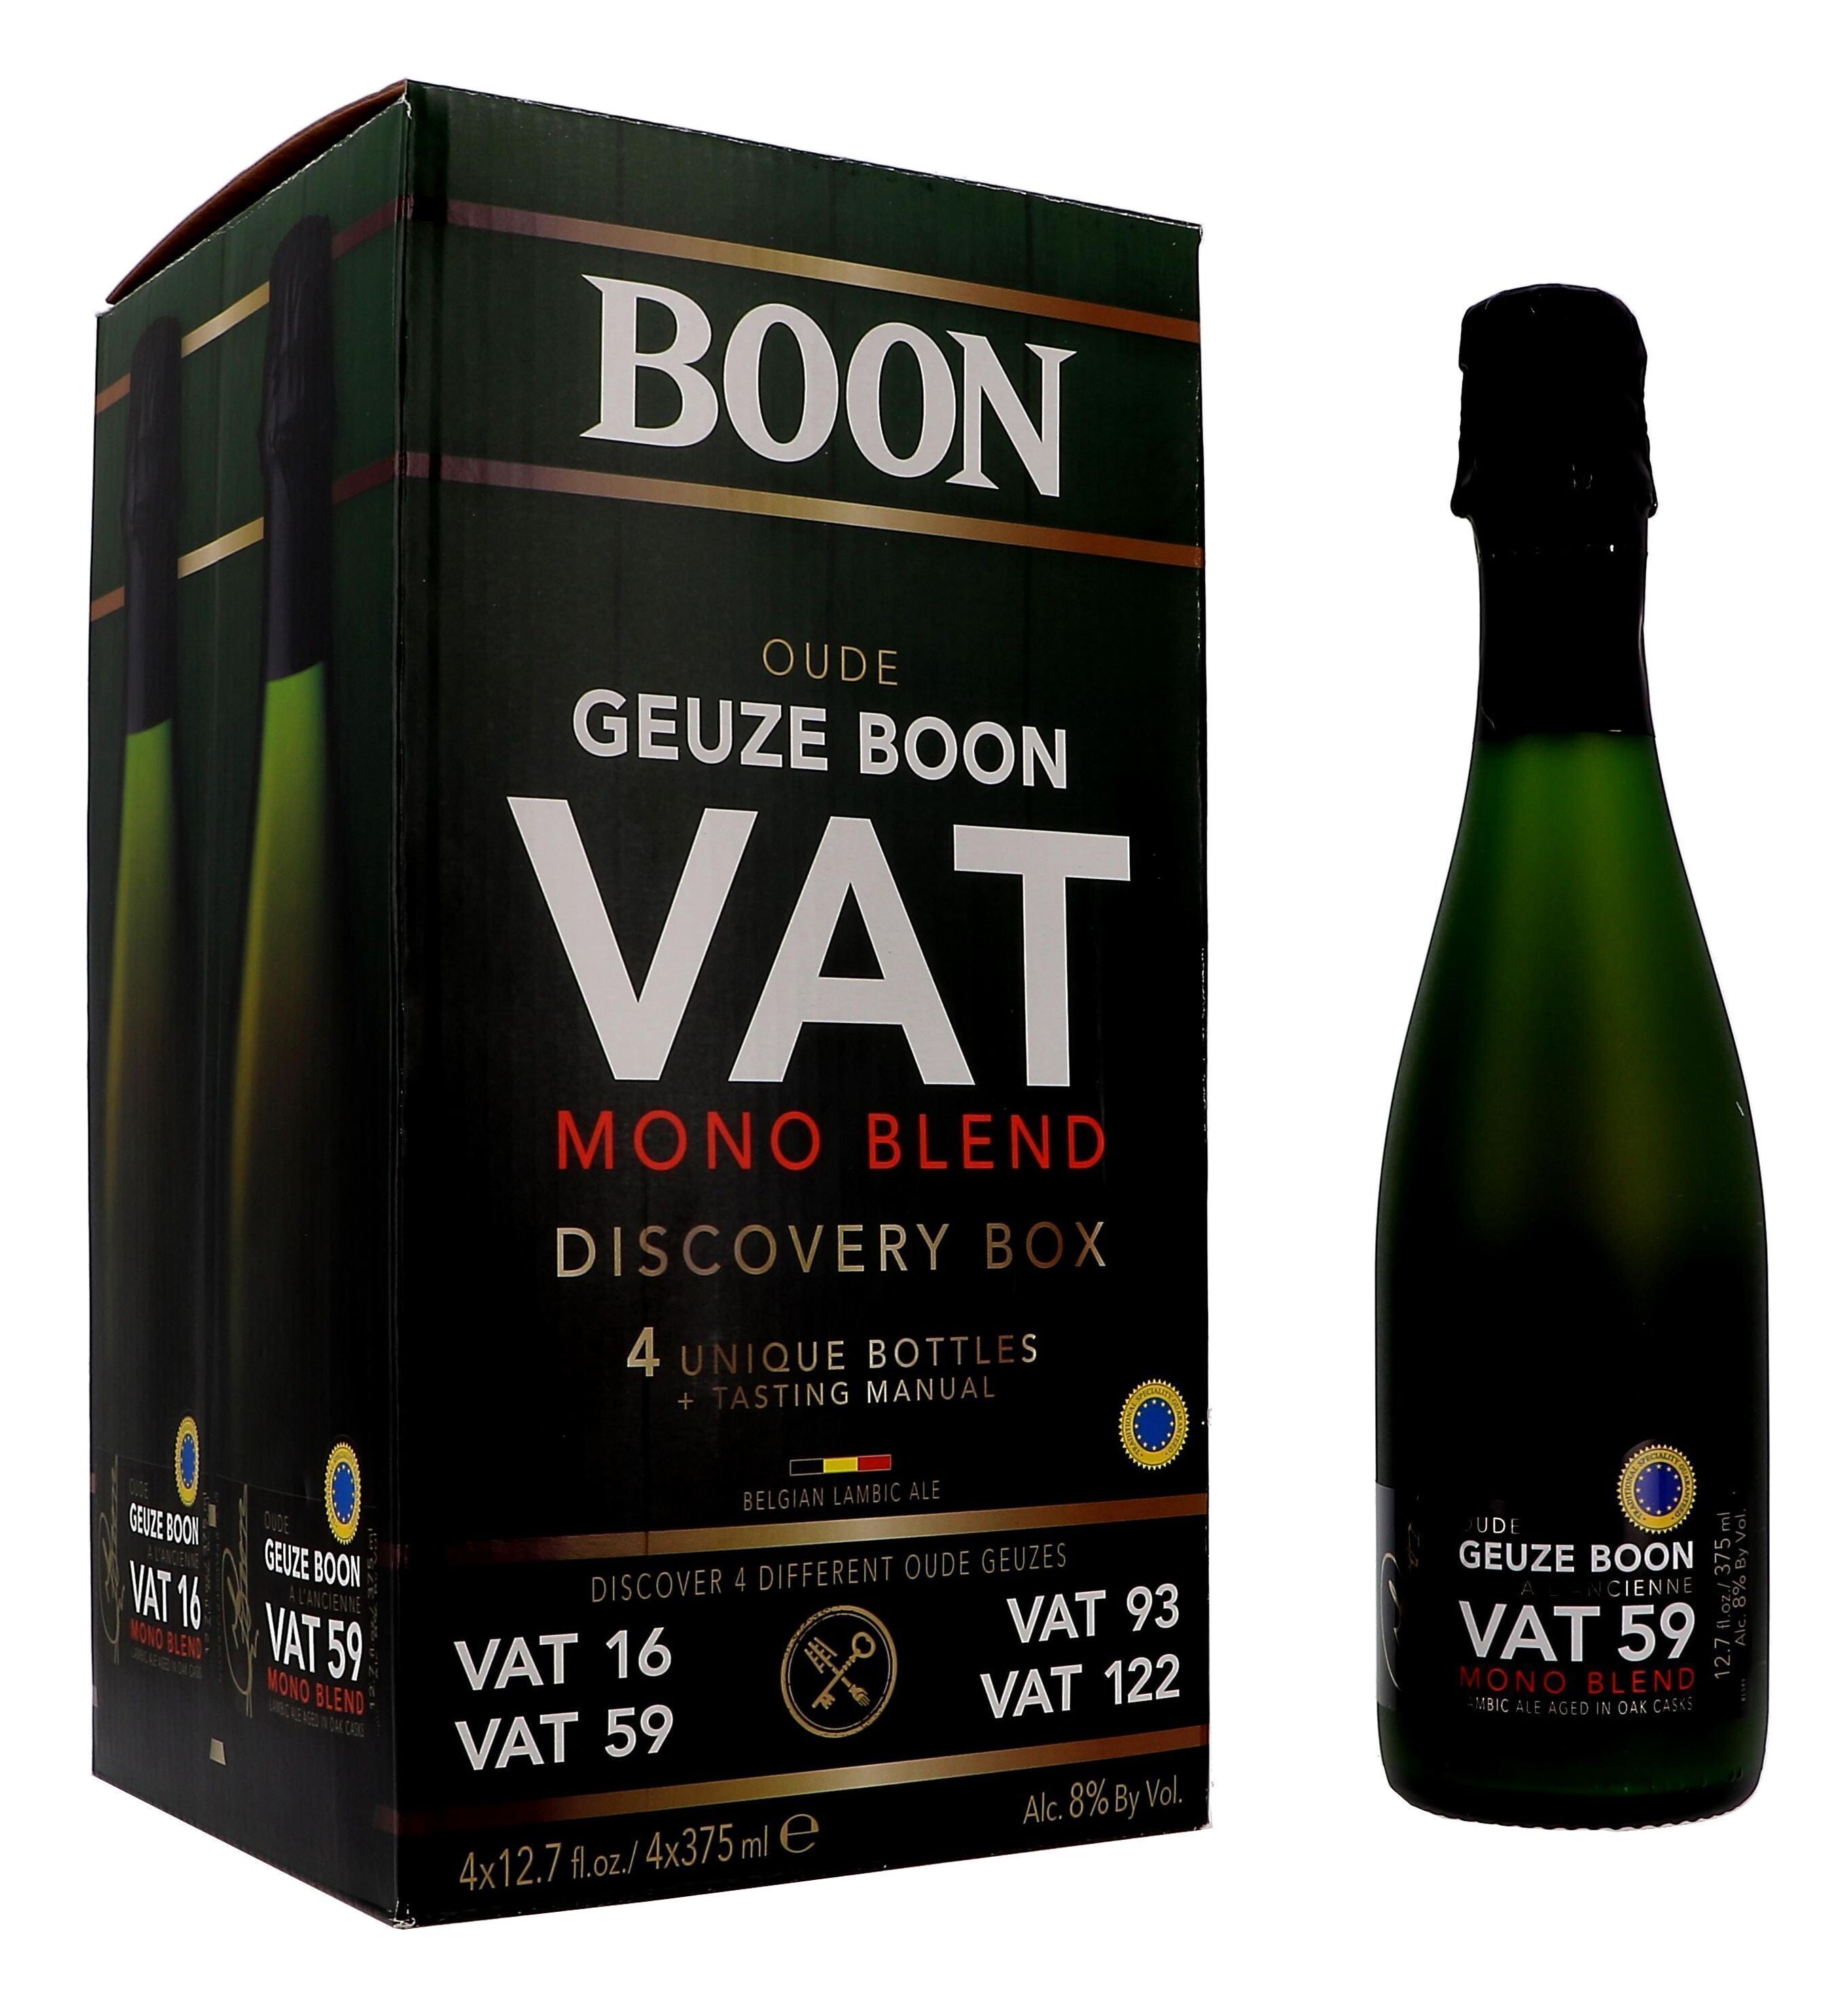 Old Geuze Boon VAT Mono Blend Discovery Box 4x37.5cl + Tasting Manual